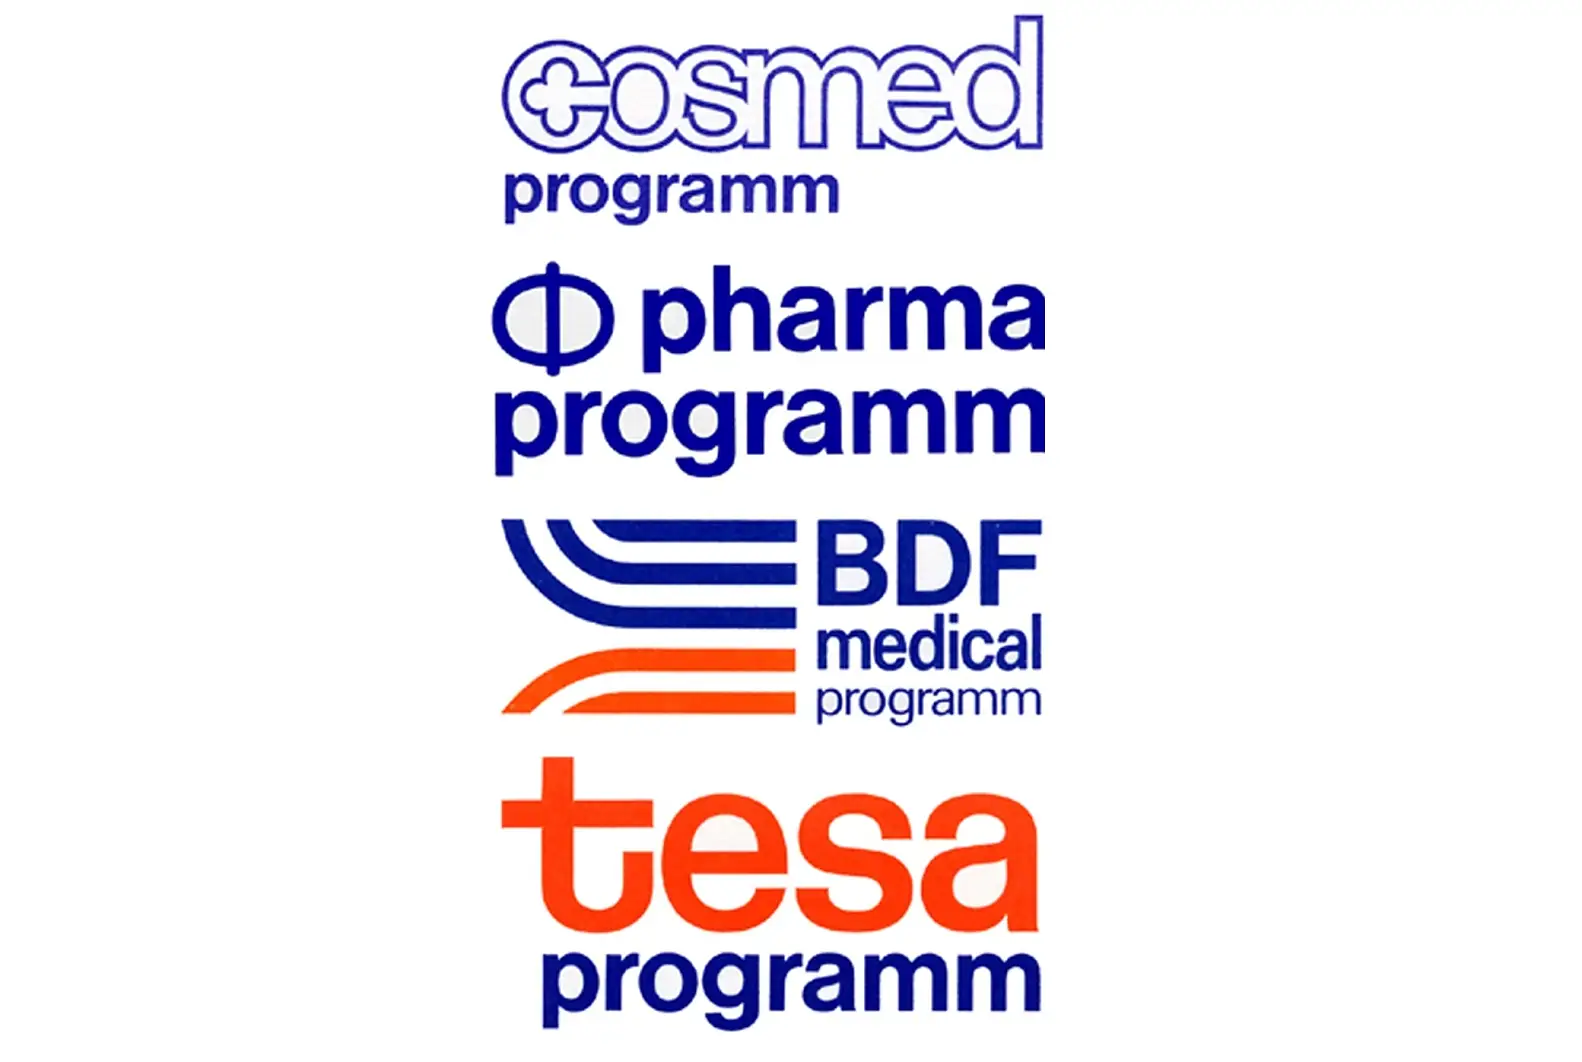 Beiersdorf introduces its four divisions Cosmed, Medical and tesa as a prelude to the further expansion of its adhesive tape business.